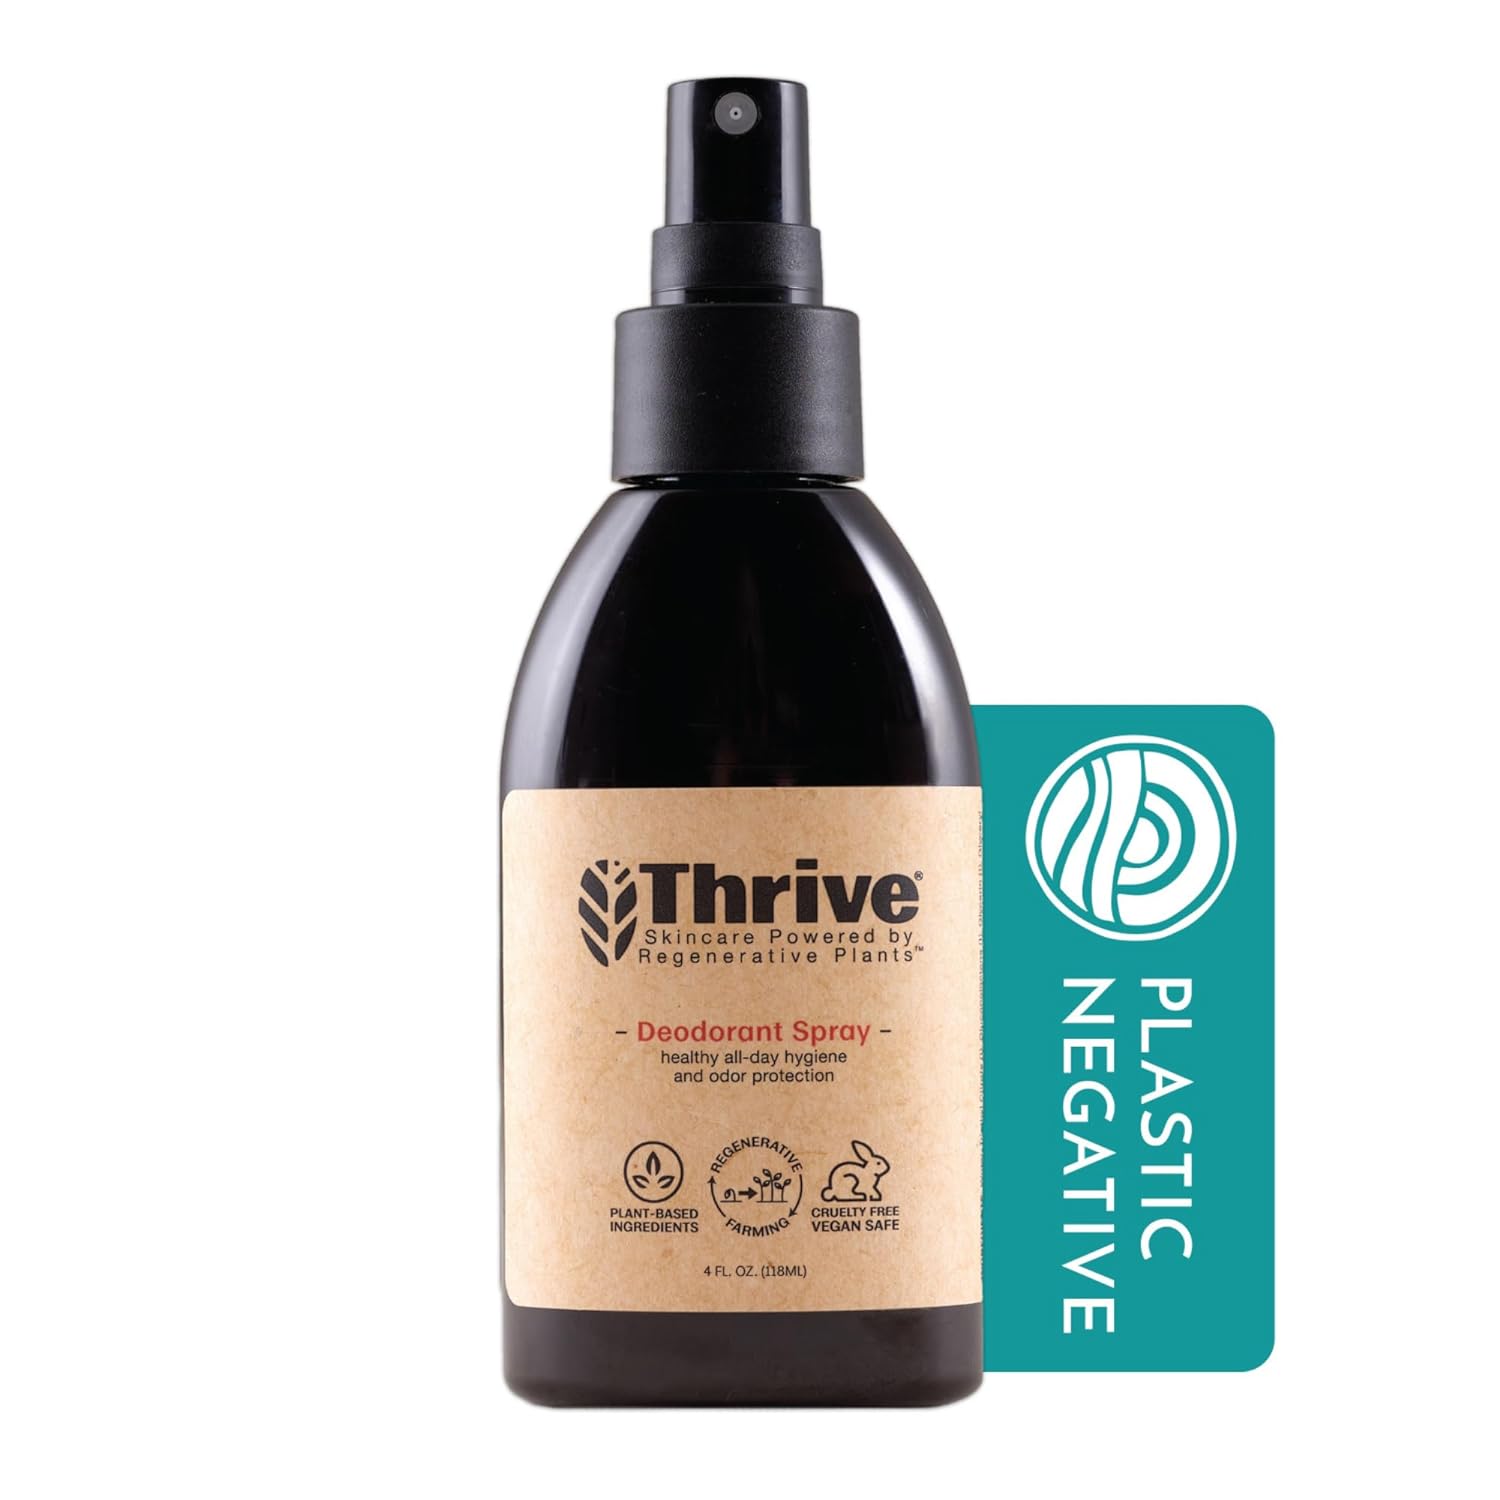 Thrive Natural Care Deodorant Spray, 4 Ounces - All Day Protection, Aluminum Free Deodorant for Women & Men, Non-Irritating Natural Spray Deodorant Powered by Regenerative Plants - Vegan